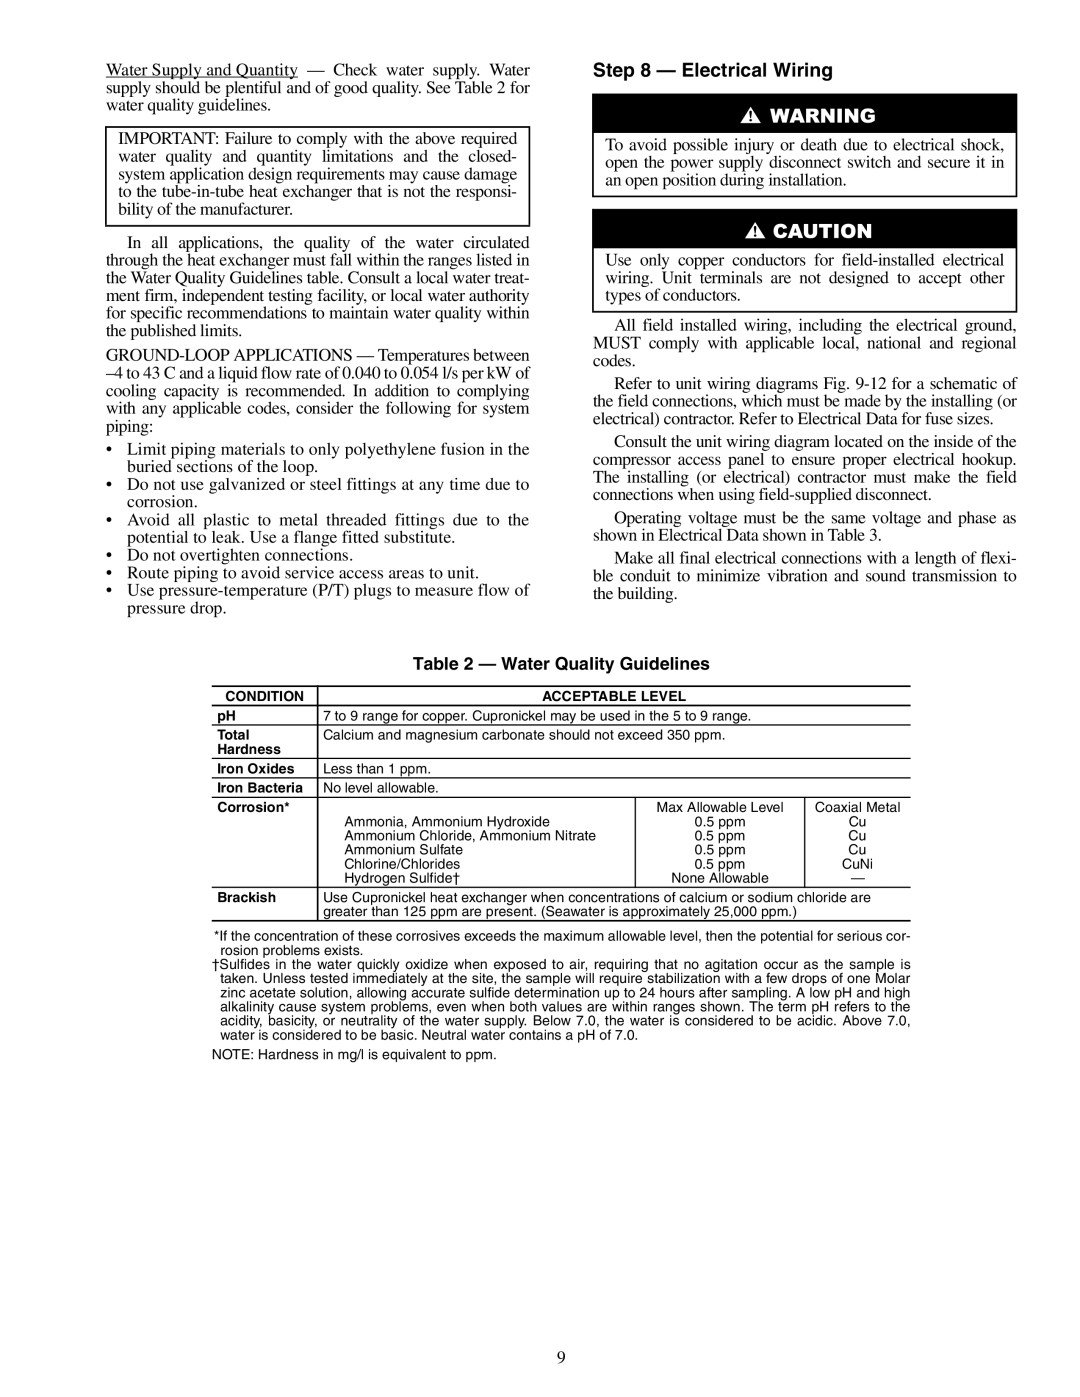 Carrier 50RHE006-060 specifications Electrical Wiring, Water Quality Guidelines 